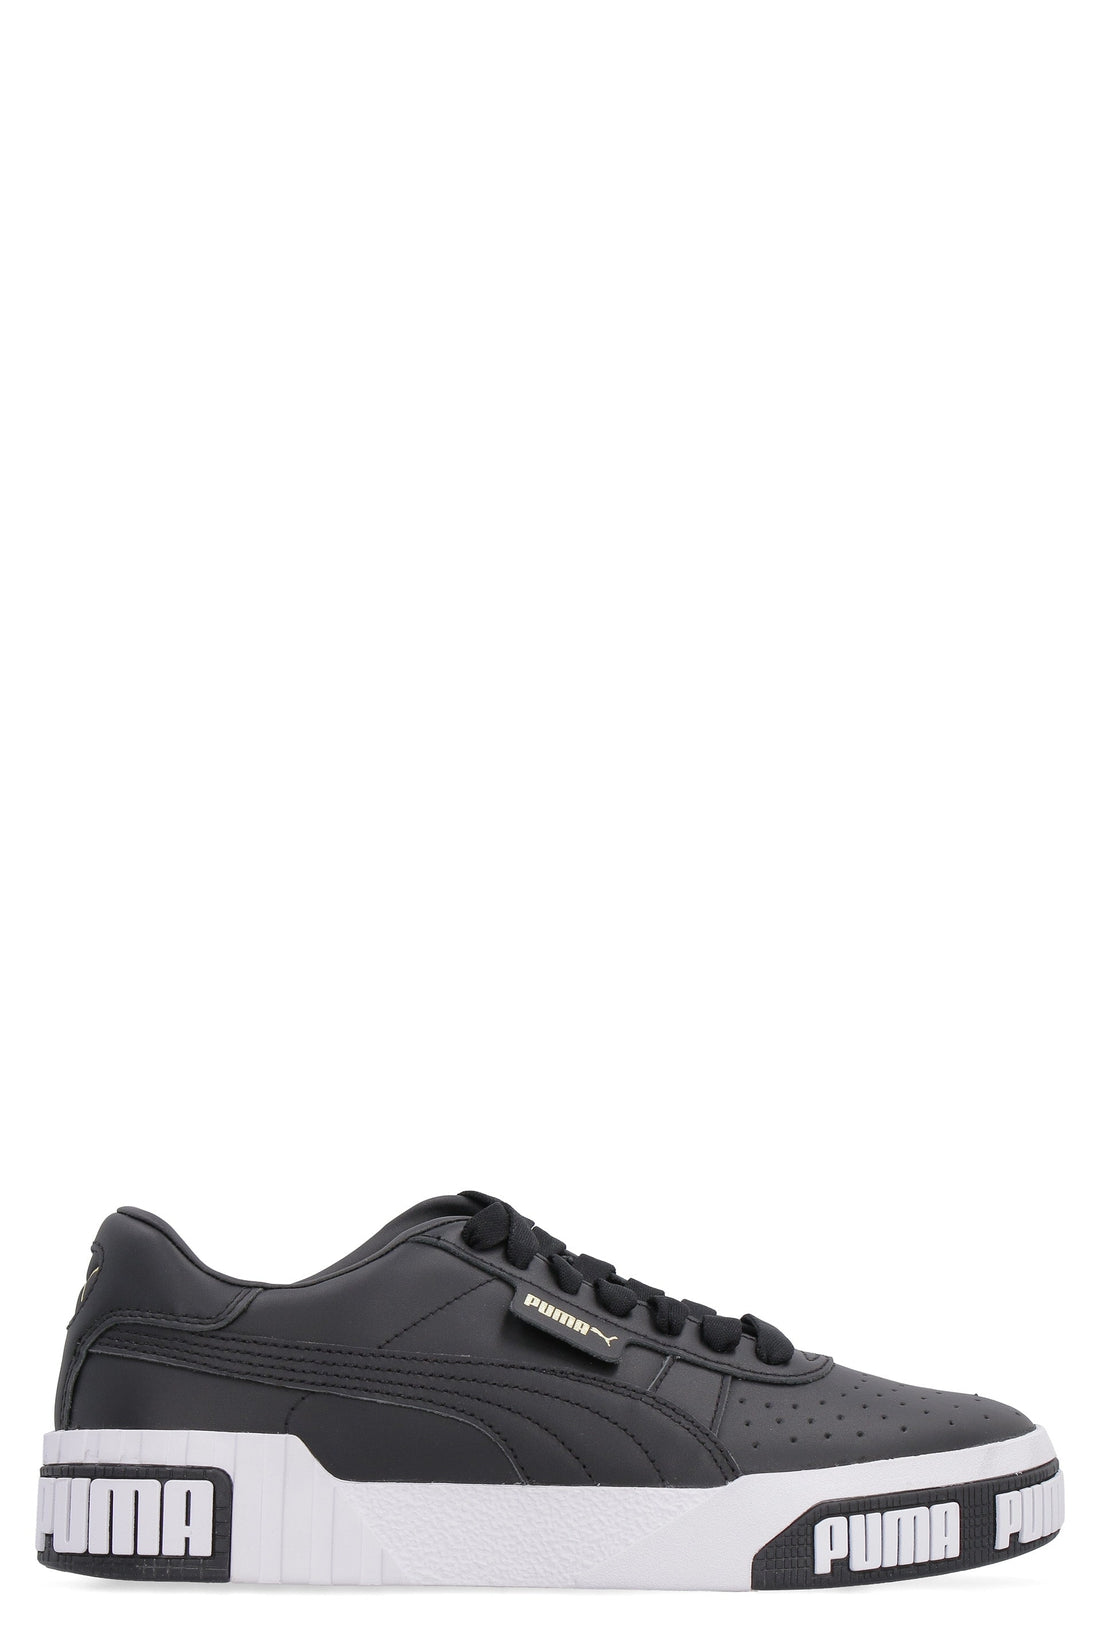 Puma-OUTLET-SALE-Cali Bold leather sneakers-ARCHIVIST